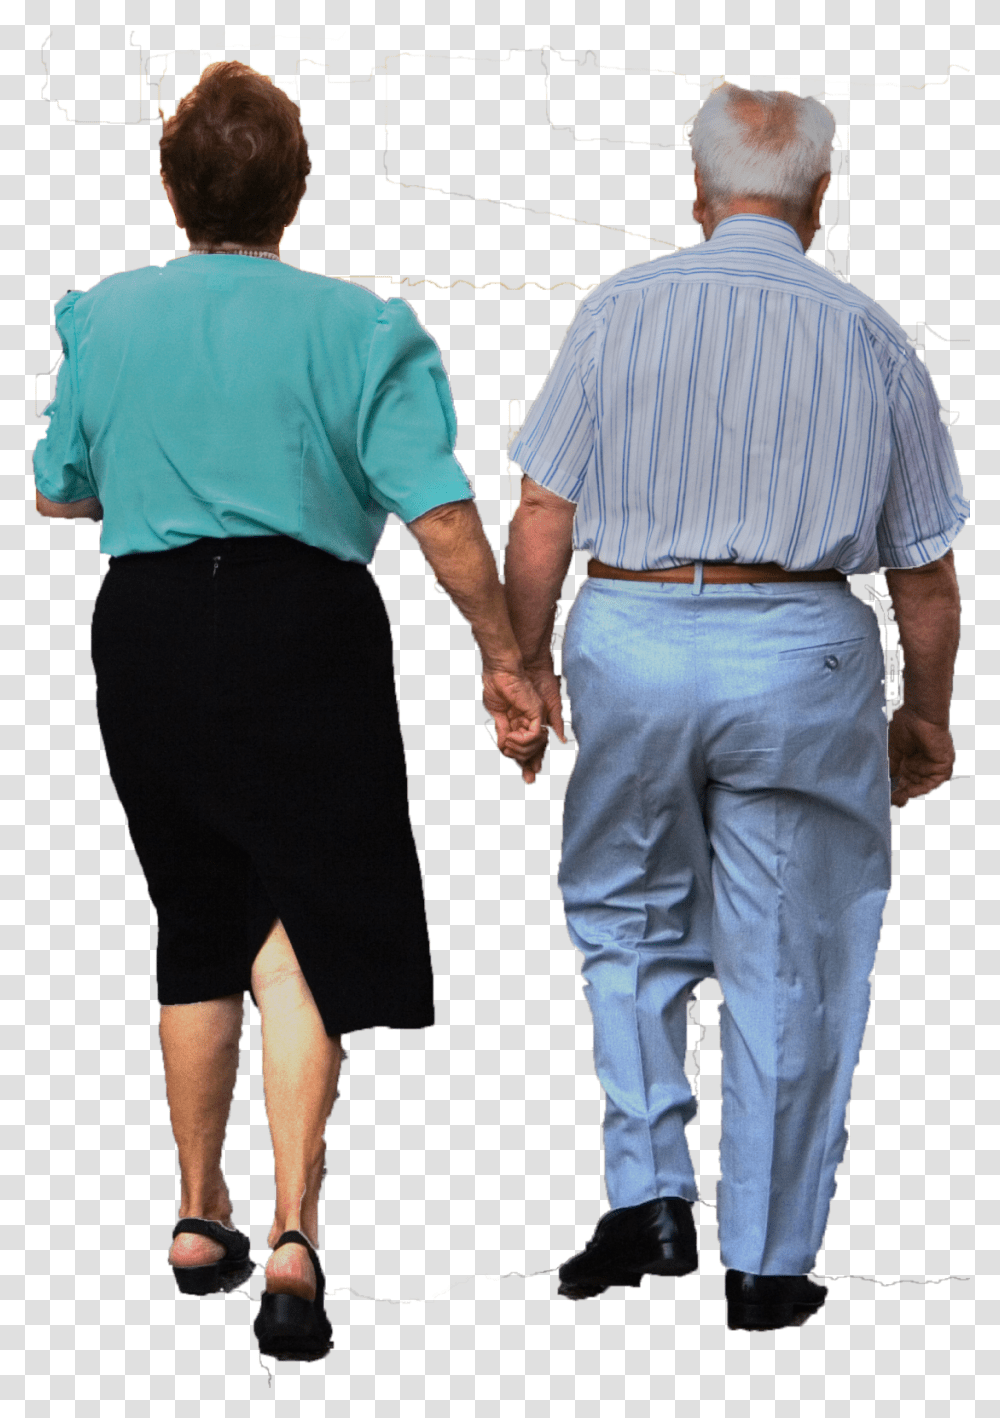 Group People Walking Architecture People Walking, Hand, Person, Human, Holding Hands Transparent Png